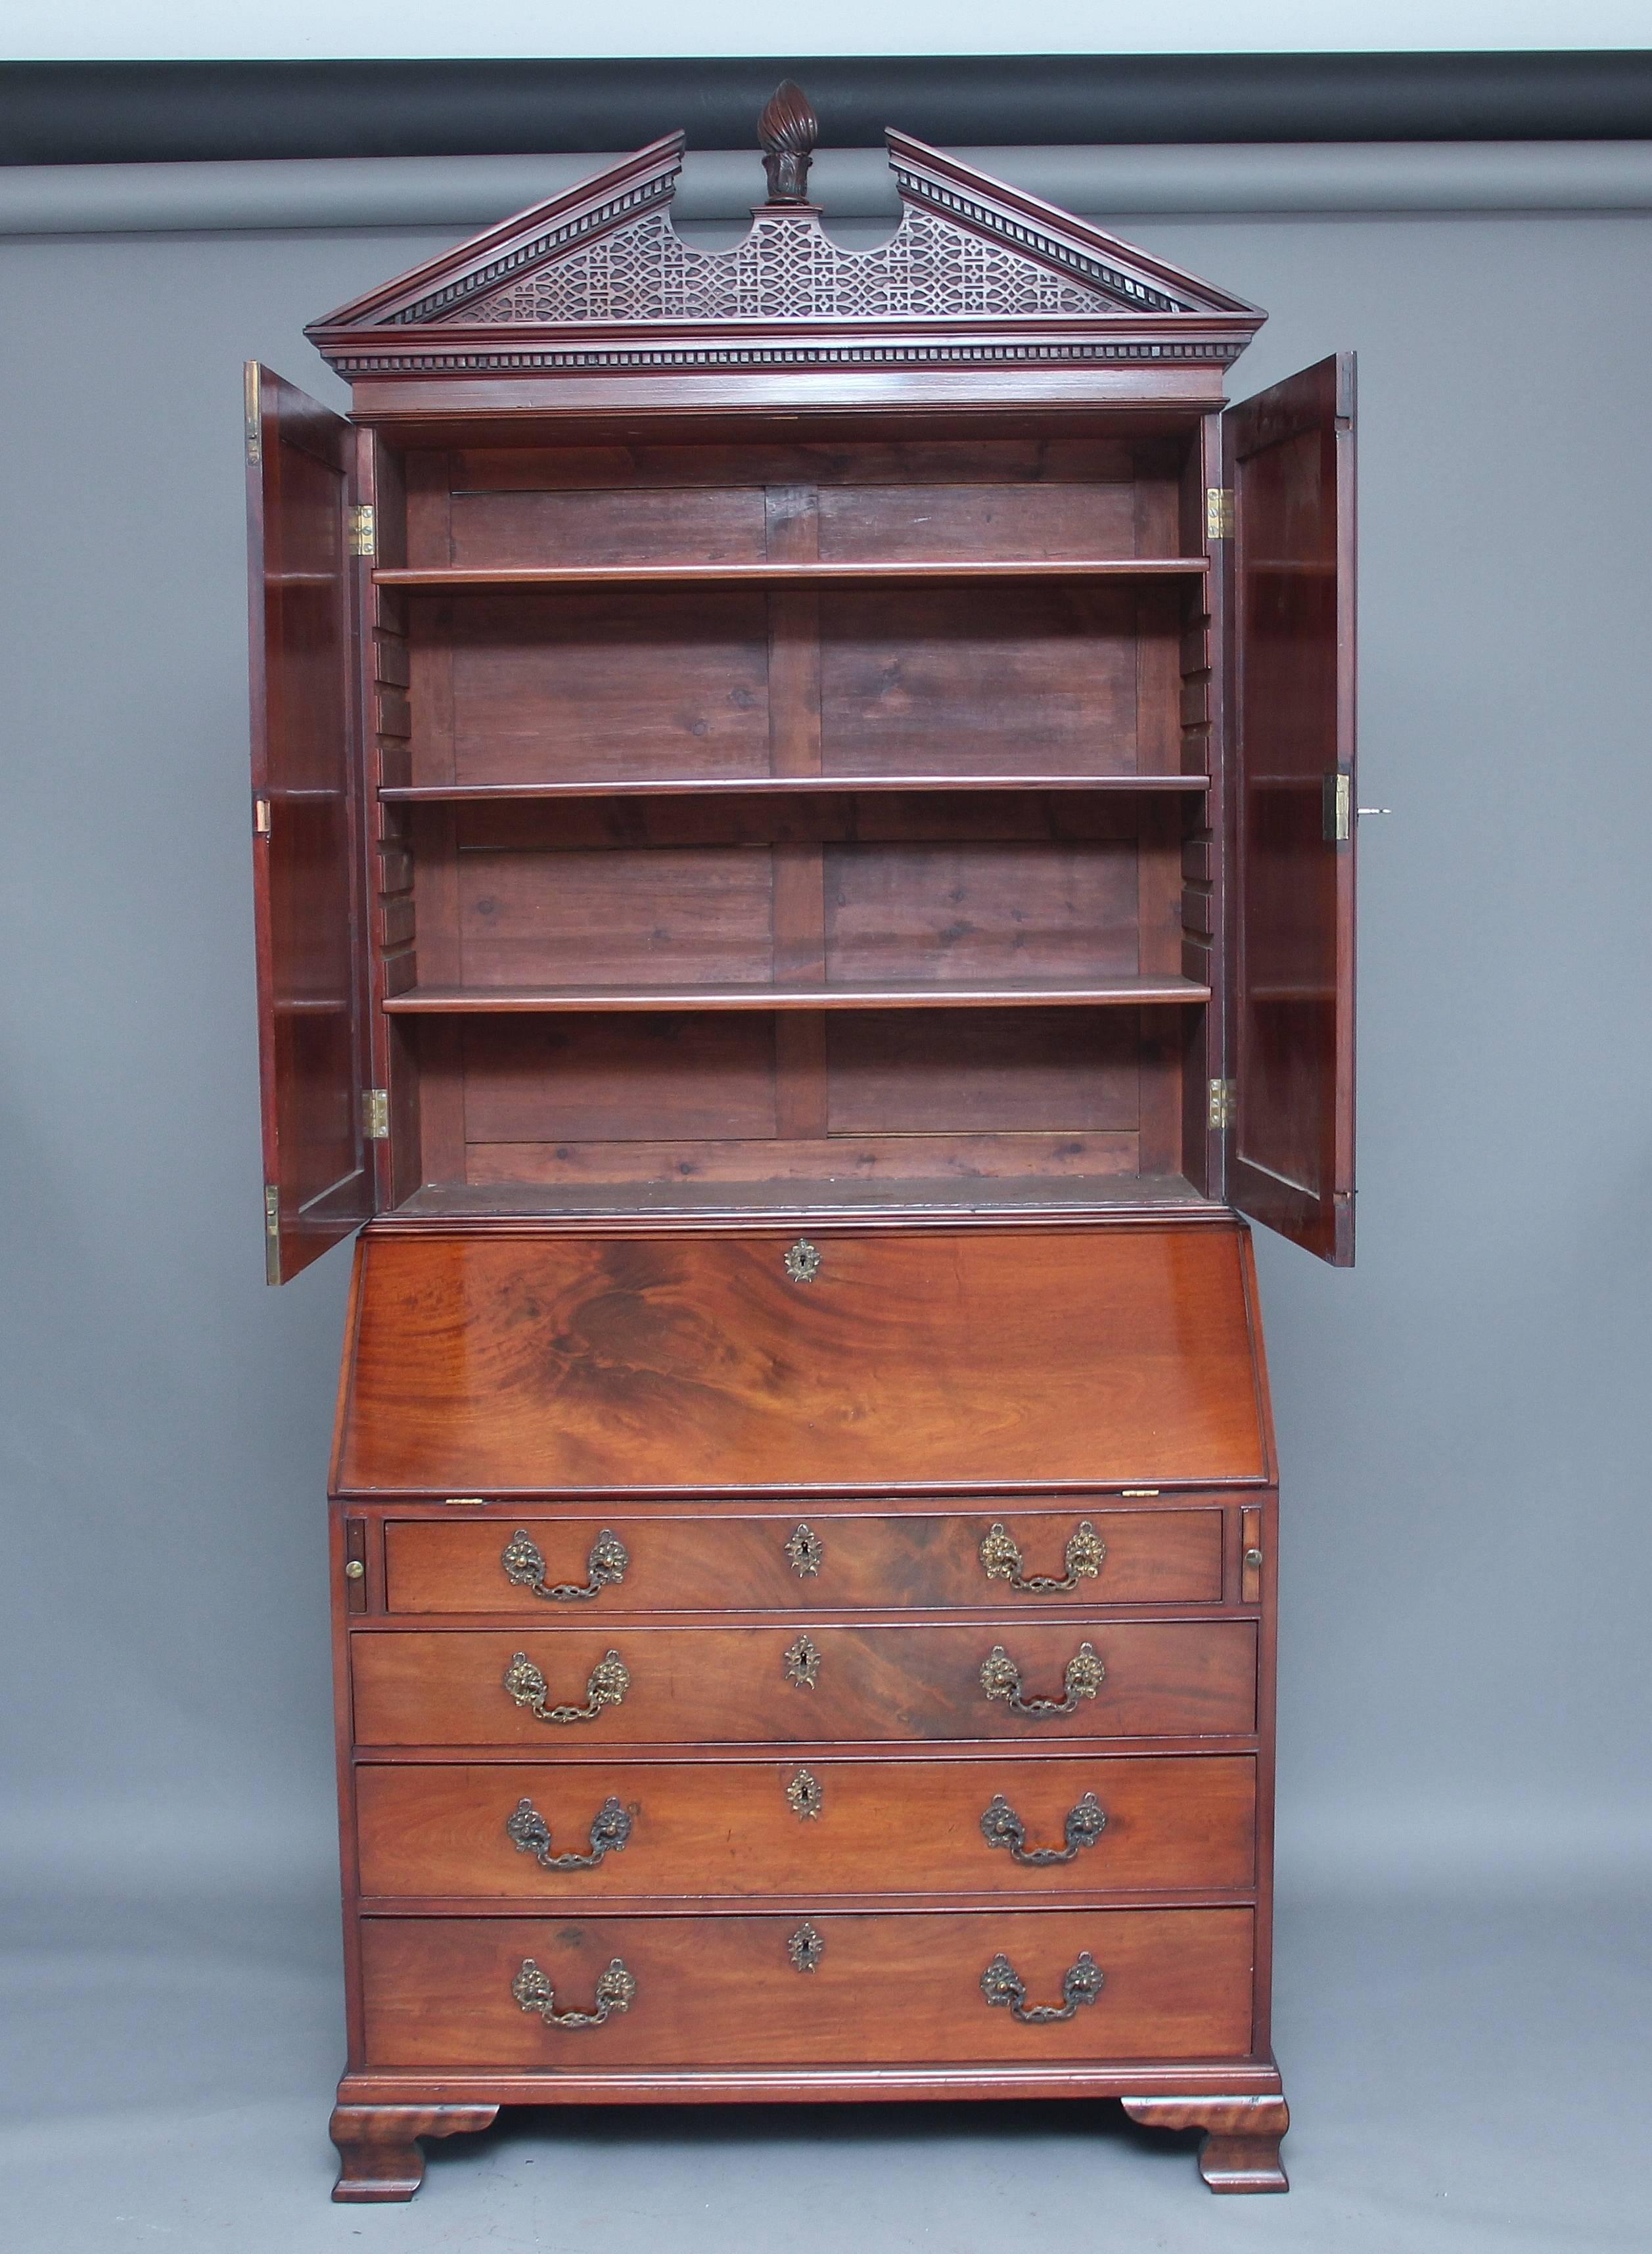 18th century mahogany bureau bookcase, having a broken arch pediment with a carved and turned finial at the centre, decorated with blind fret and dentil moulding, with two fielded panelled doors below opening to reveal three adjustable shelves